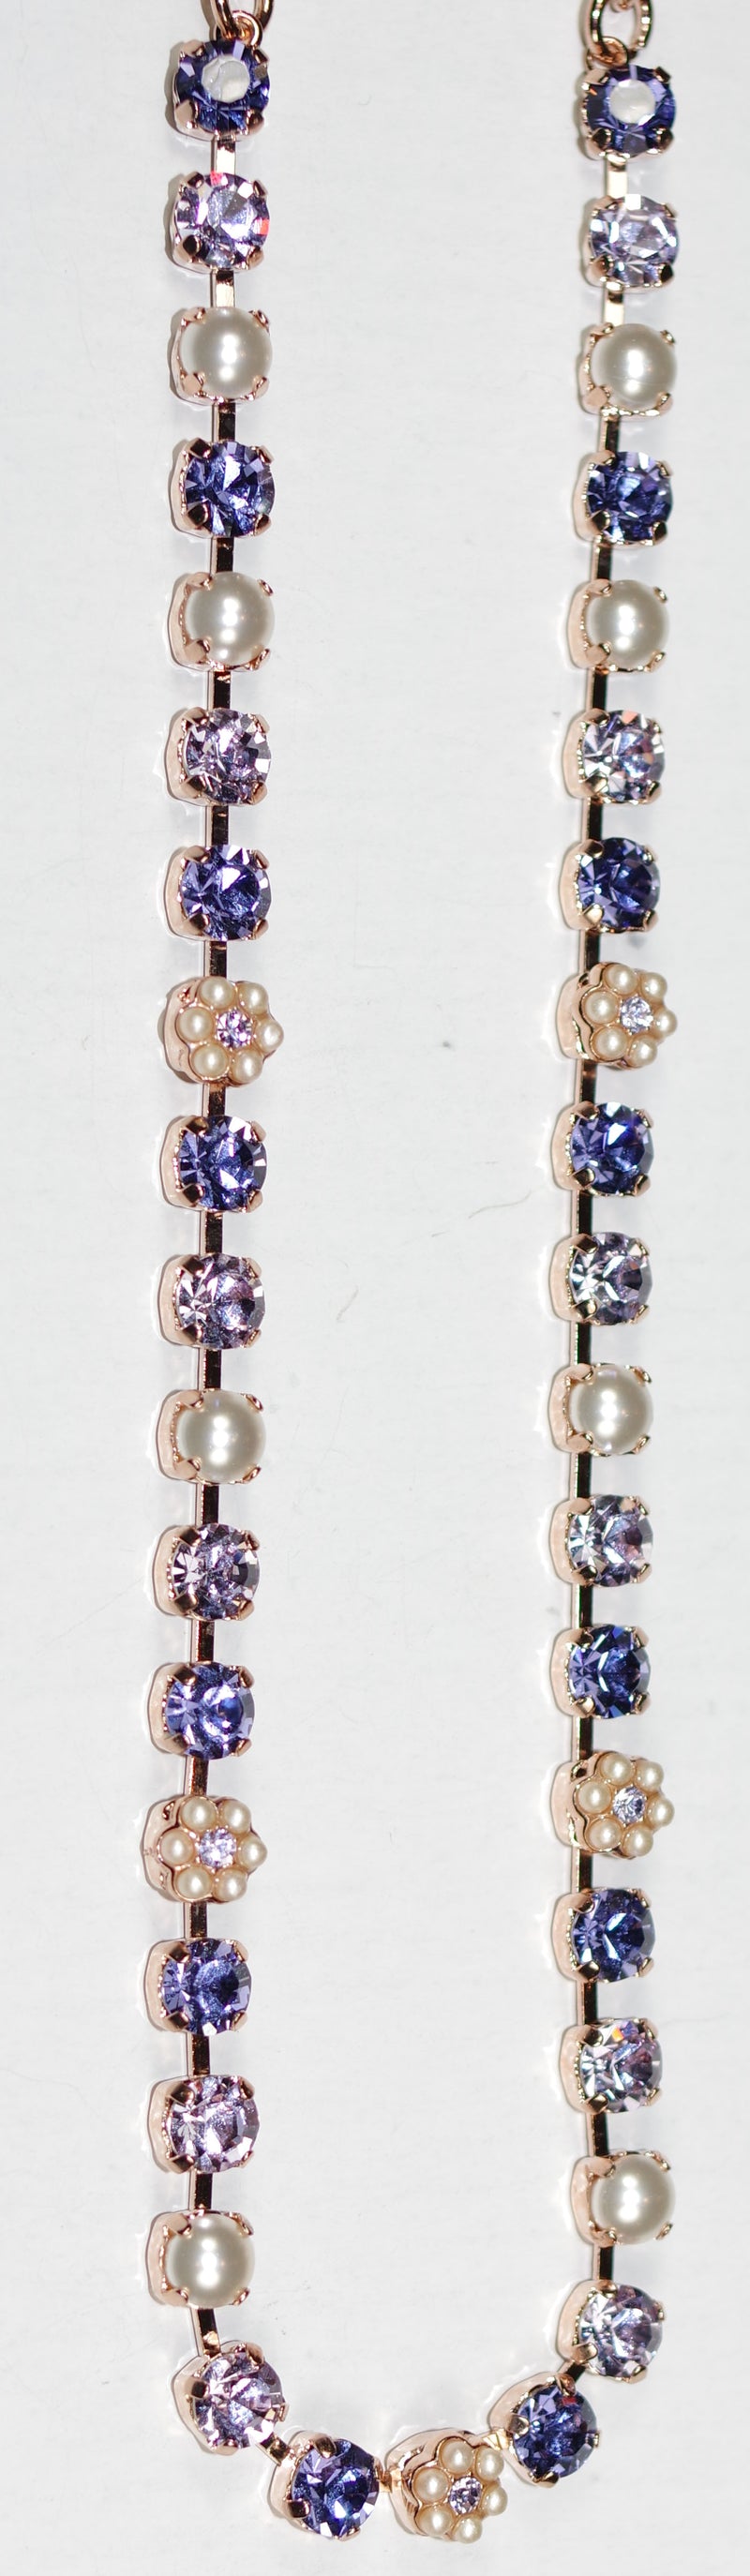 MARIANA NECKLACE ROMANCE: purple, pearl 1/4" stones in rose gold setting, 18" adjustable chain